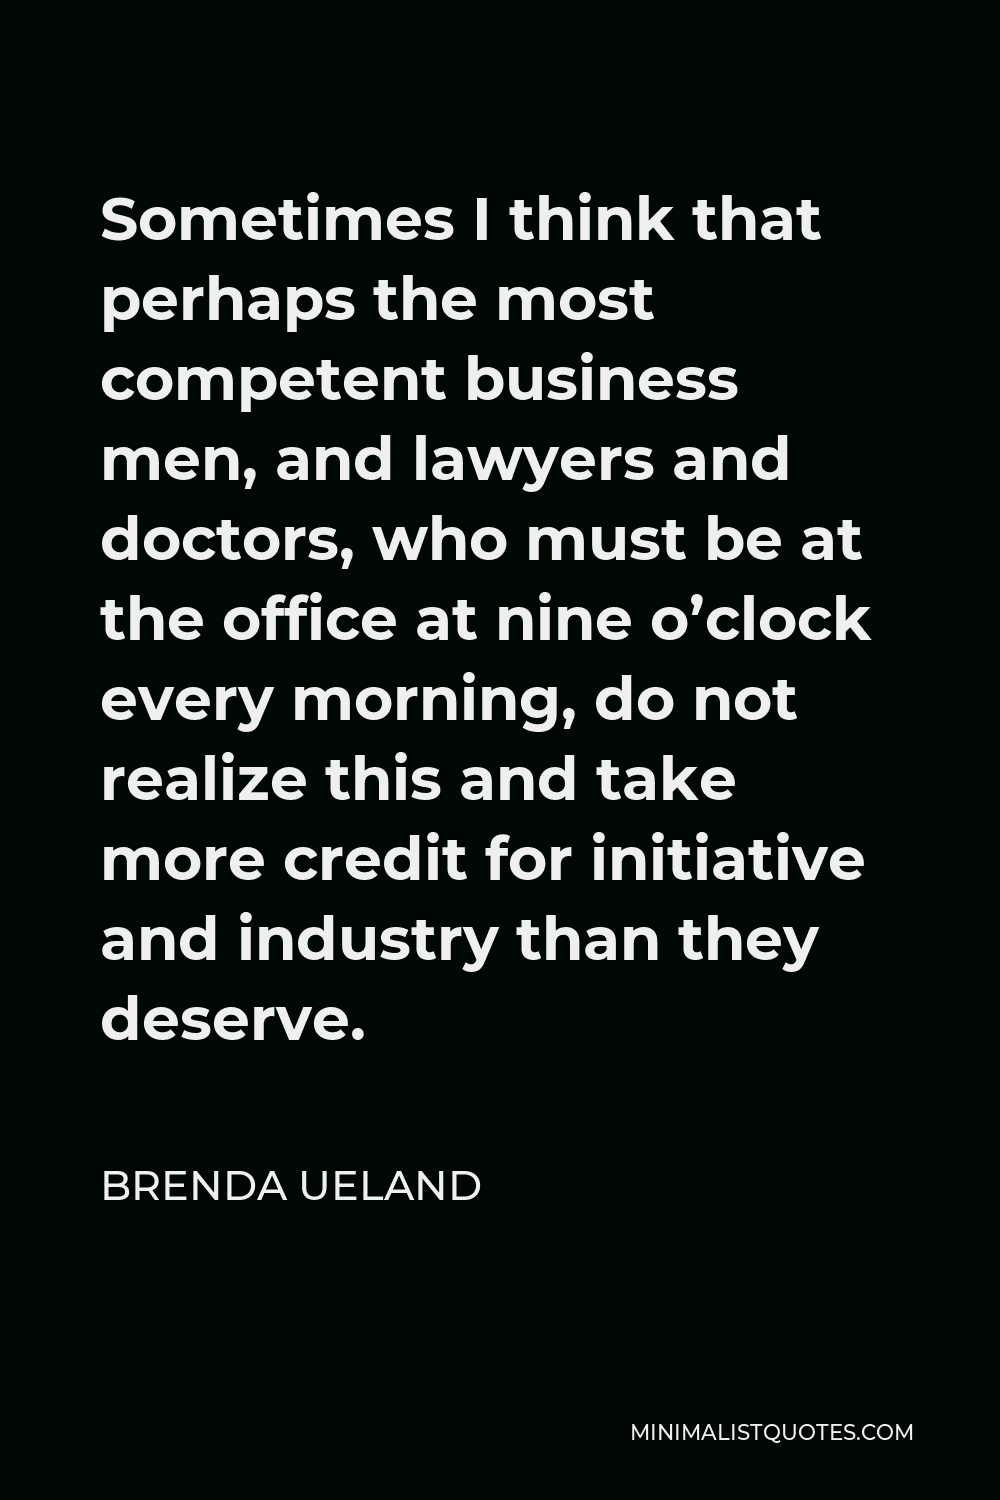 Brenda Ueland Quote - Sometimes I think that perhaps the most competent business men, and lawyers and doctors, who must be at the office at nine o’clock every morning, do not realize this and take more credit for initiative and industry than they deserve.